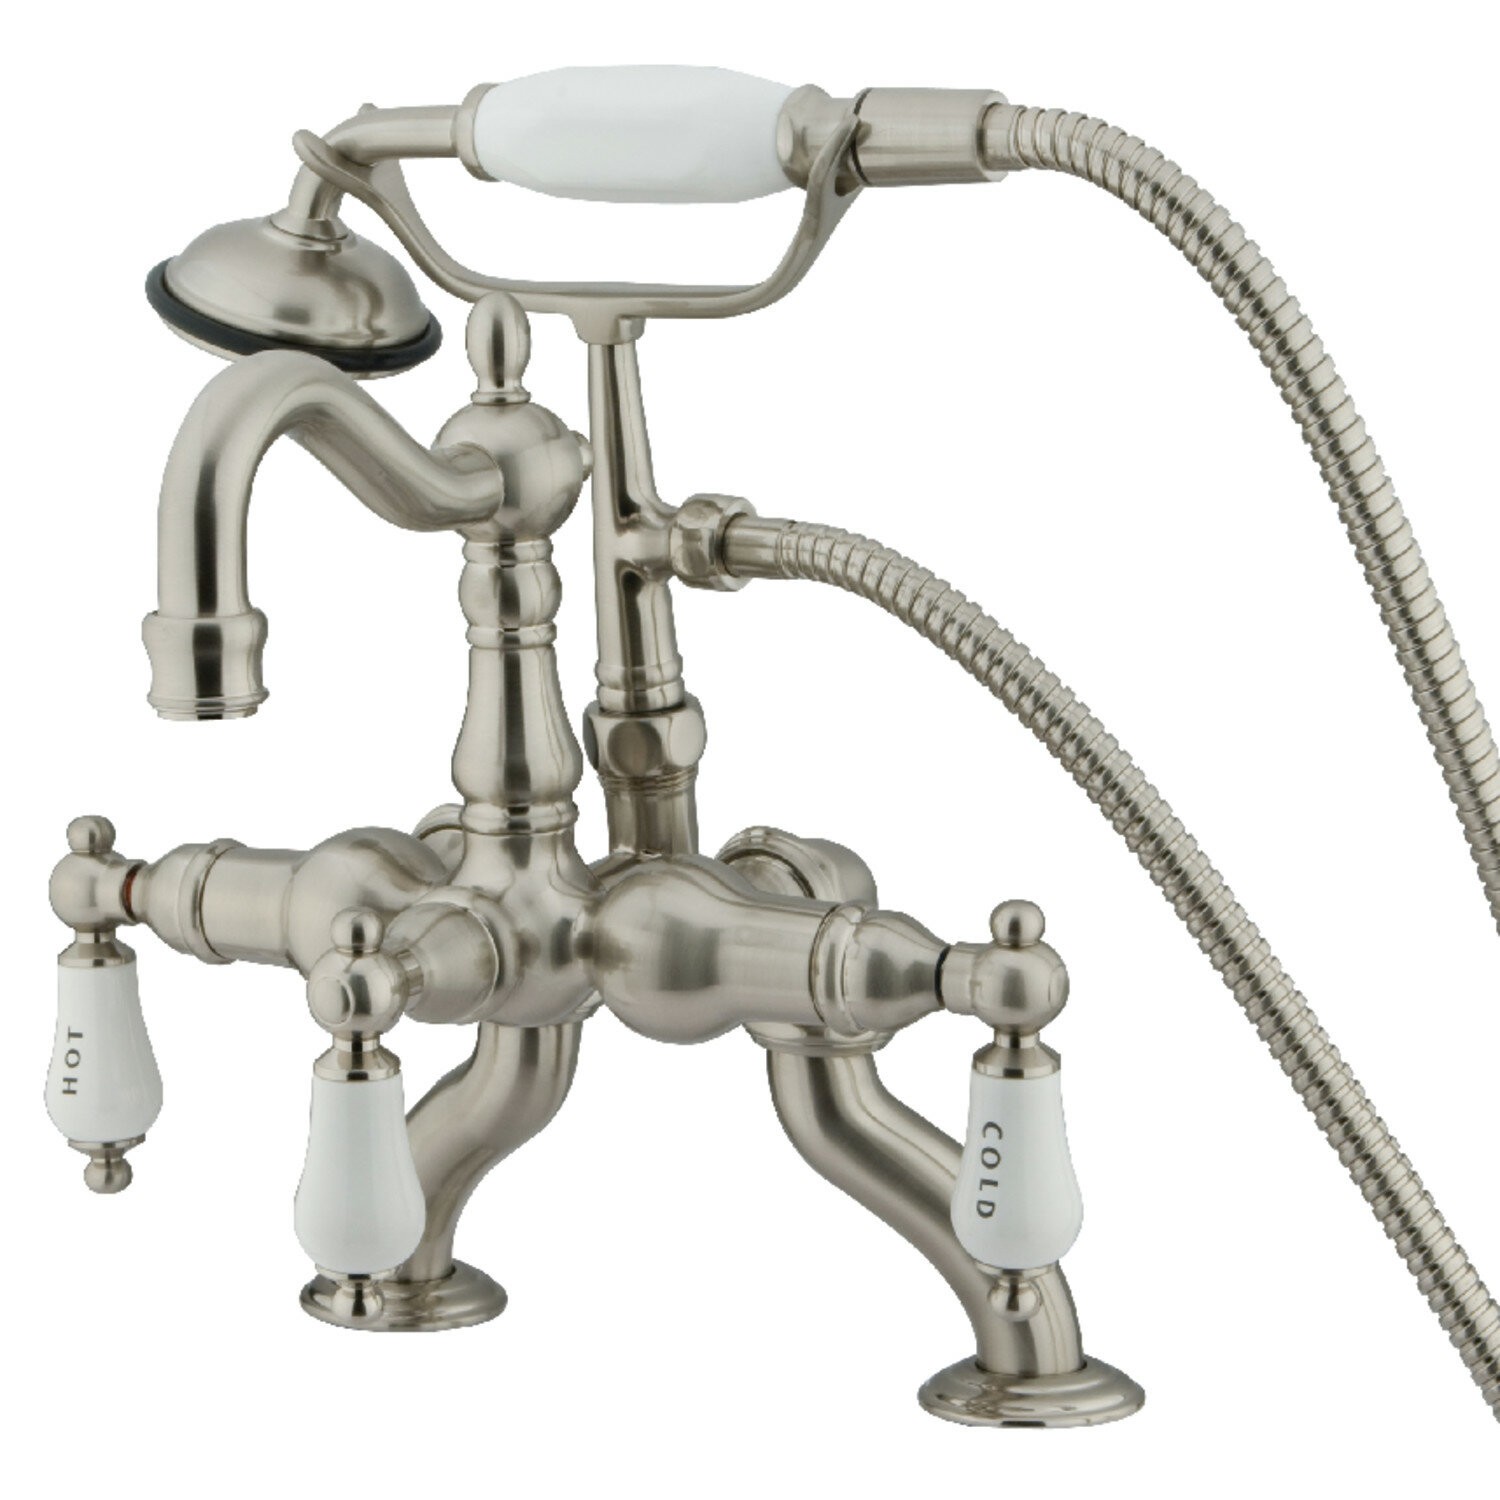 KINGSTON BRASS CC2009T VINTAGE CLAWFOOT TUB FILLER FAUCET WITH HAND SHOWER